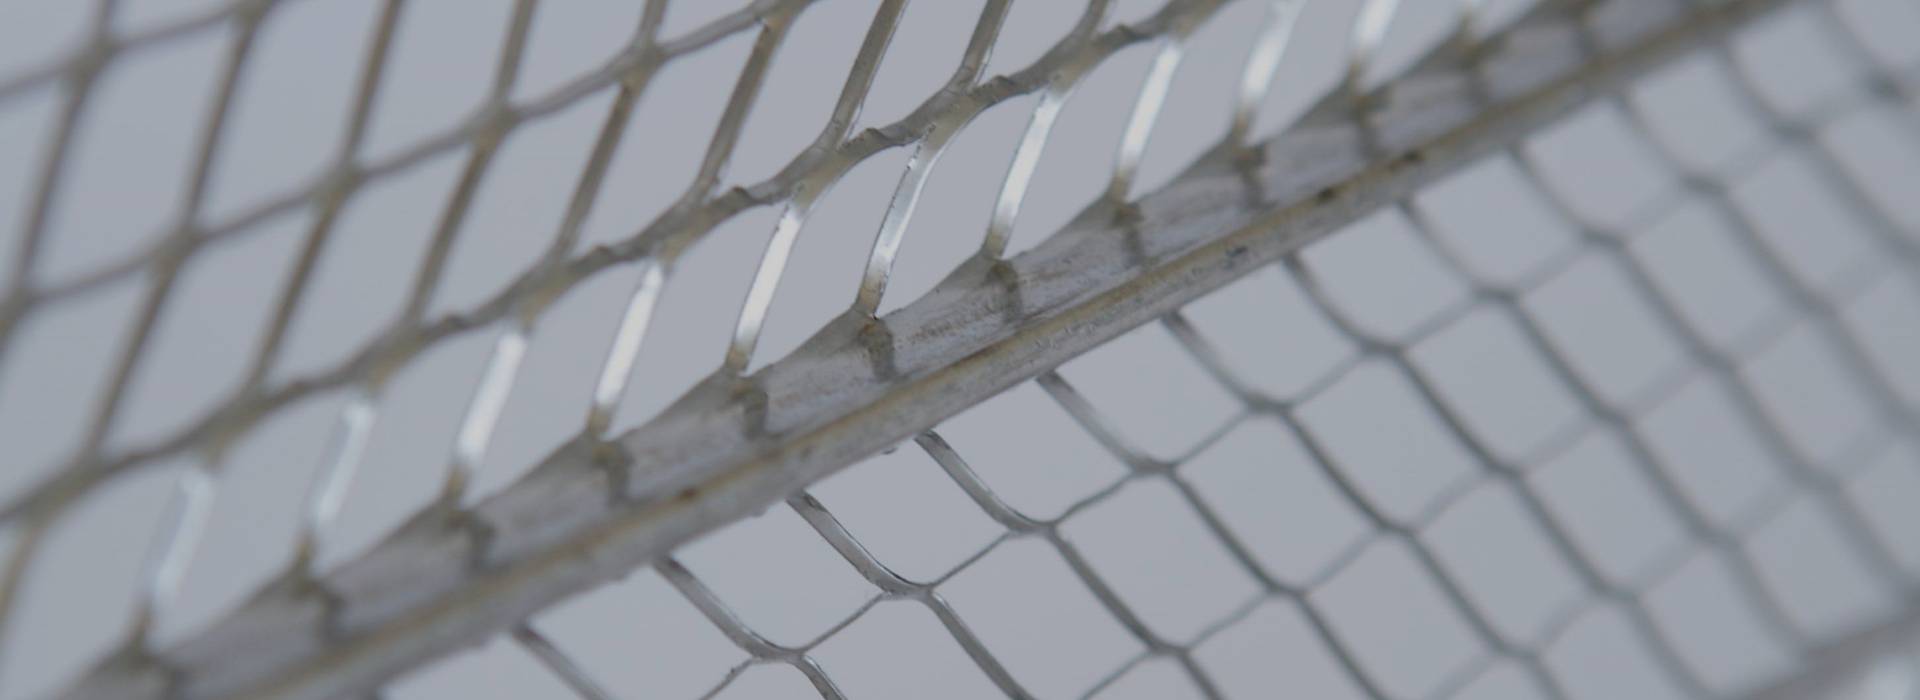 A detail of metal rib lath on gray background.